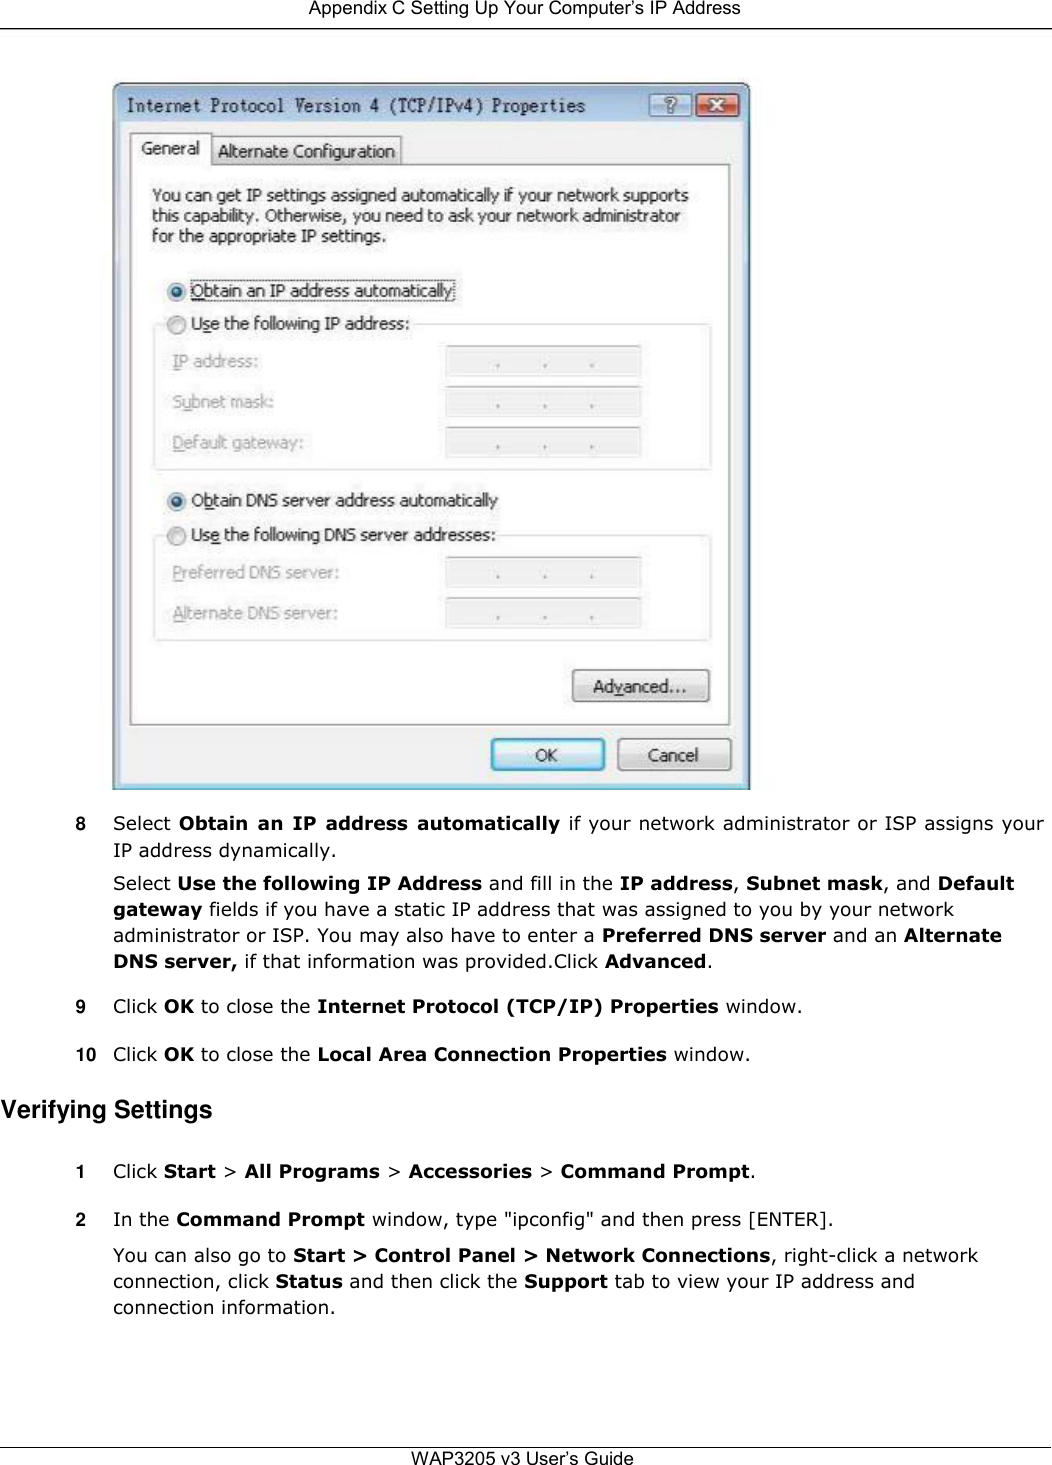  Appendix C Setting Up Your Computer’s IP Address                                       8  Select Obtain  an  IP  address  automatically if your network administrator or ISP assigns your IP address dynamically.  Select Use the following IP Address and fill in the IP address, Subnet mask, and Default gateway fields if you have a static IP address that was assigned to you by your network administrator or ISP. You may also have to enter a Preferred DNS server and an Alternate DNS server, if that information was provided.Click Advanced.  9  Click OK to close the Internet Protocol (TCP/IP) Properties window.  10 Click OK to close the Local Area Connection Properties window.  Verifying Settings  1  Click Start &gt; All Programs &gt; Accessories &gt; Command Prompt.  2  In the Command Prompt window, type &quot;ipconfig&quot; and then press [ENTER].  You can also go to Start &gt; Control Panel &gt; Network Connections, right-click a network connection, click Status and then click the Support tab to view your IP address and connection information.       WAP3205 v3 User’s Guide 